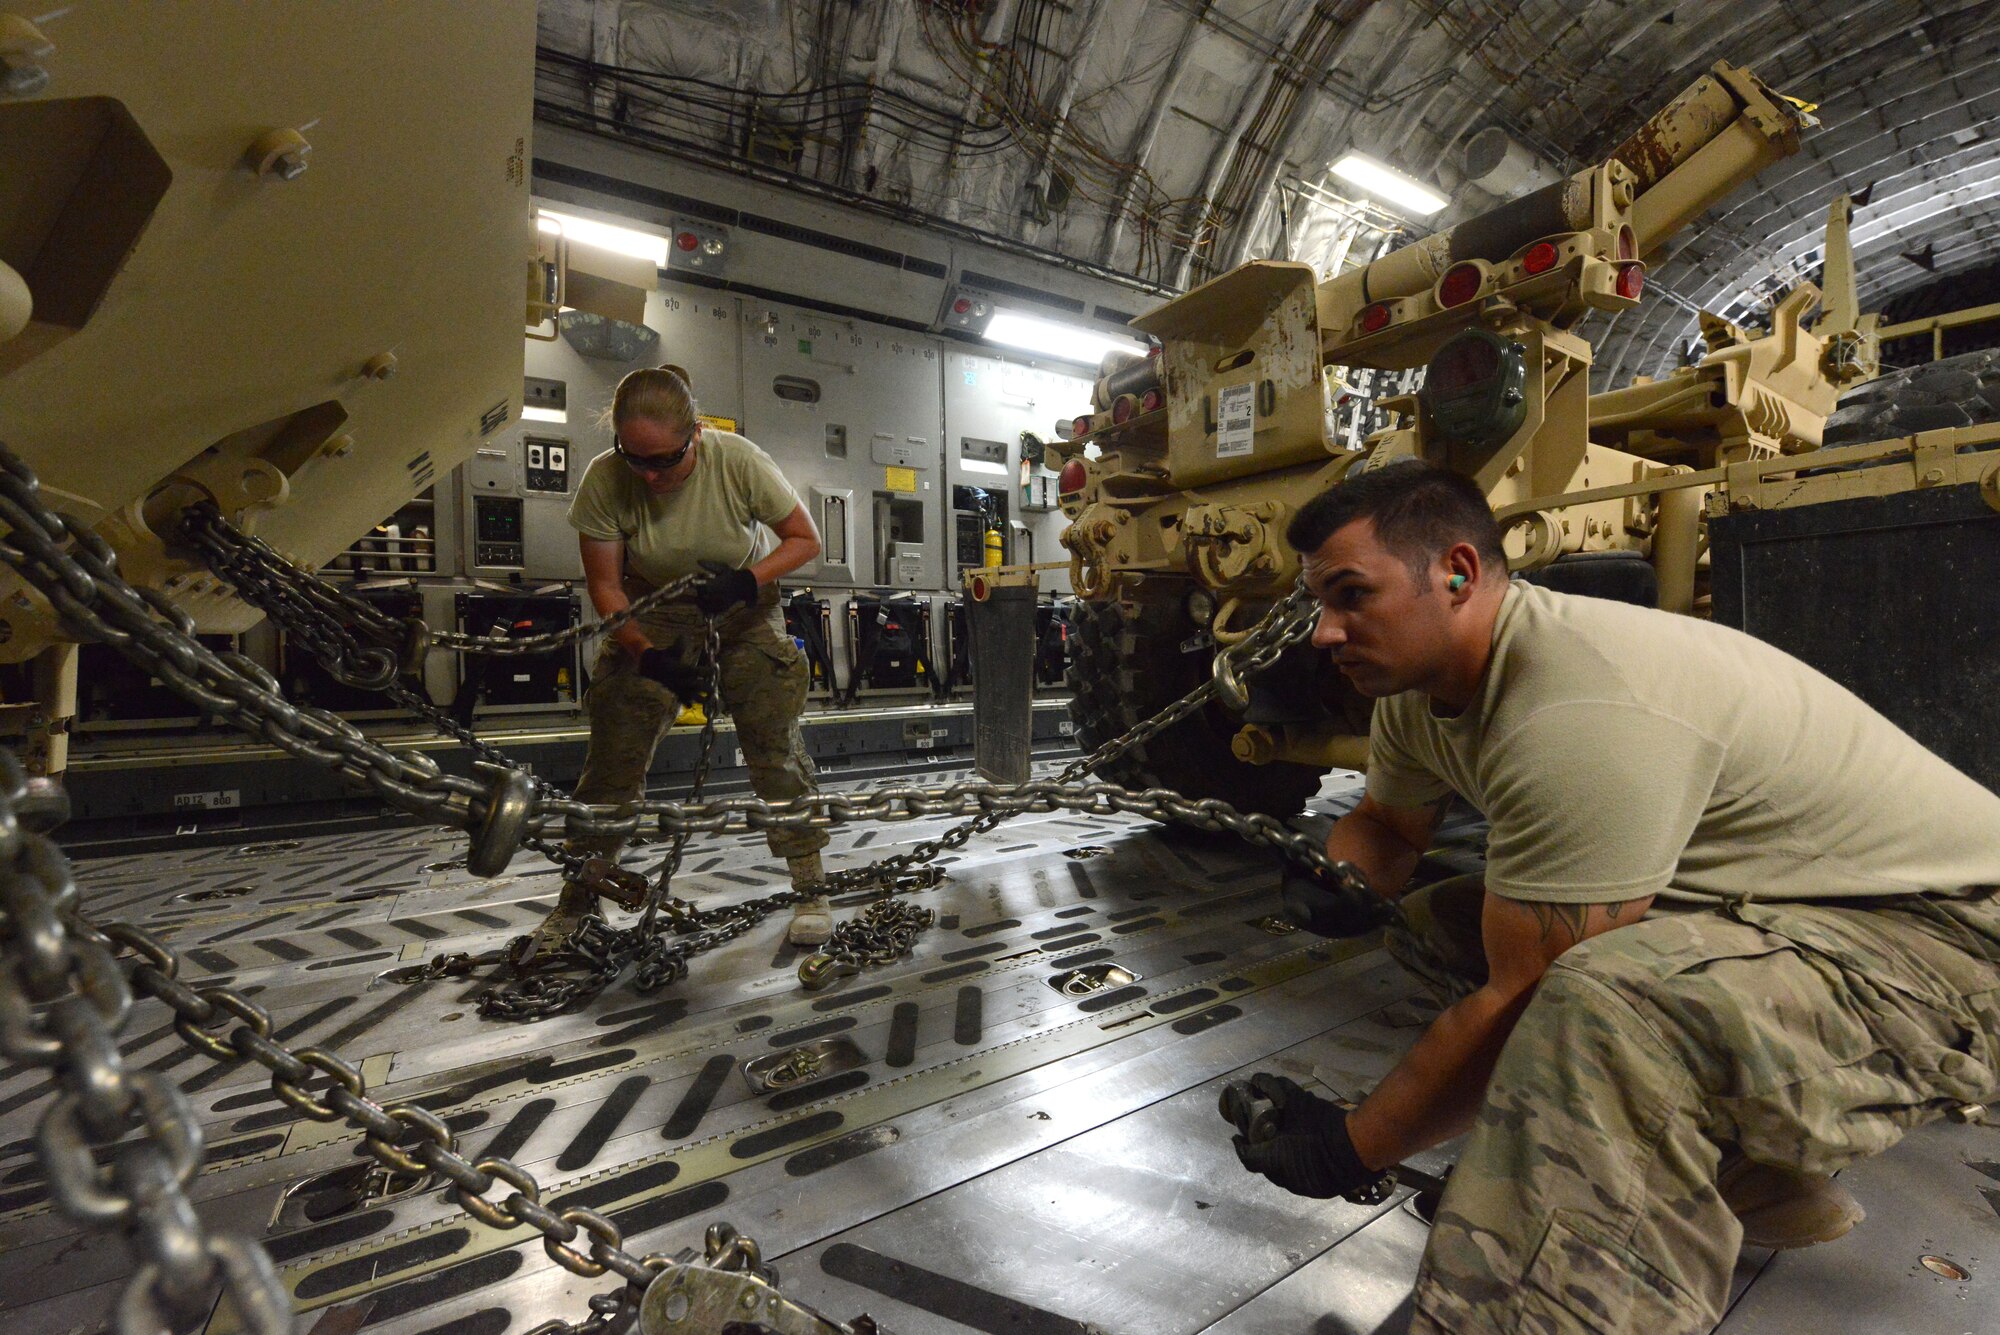 U.S. Air Force Master Sgt. Jessica Mallet, 455th Expeditionary Aerial Port Squadron Detachment 1 chief, and Staff Sgt. Reuben Montes, an air transportation journeyman, work together to secure armored vehicles aboard a C-17 Globemaster III while at Mazar-e Sharif, Afghanistan June 24, 2014. As part of the retrograde mission, EAPS Det 1 is responsible for inspecting and loading cargo and vehicles leaving Mazar-e Sharif. Mallett, a native of Clarksville, Tenn., is deployed from the 735th Air Mobility Squadron, Joint Base Pearl Harbor-Hickam, Hawaii, while Montes is a native of Worthington, Ohio and deployed from the 375th Logistics Readiness Squadron, Scott Air Force Base, Ill. (U.S. Air Force photo by Master Sgt. Cohen A. Young/Released)  